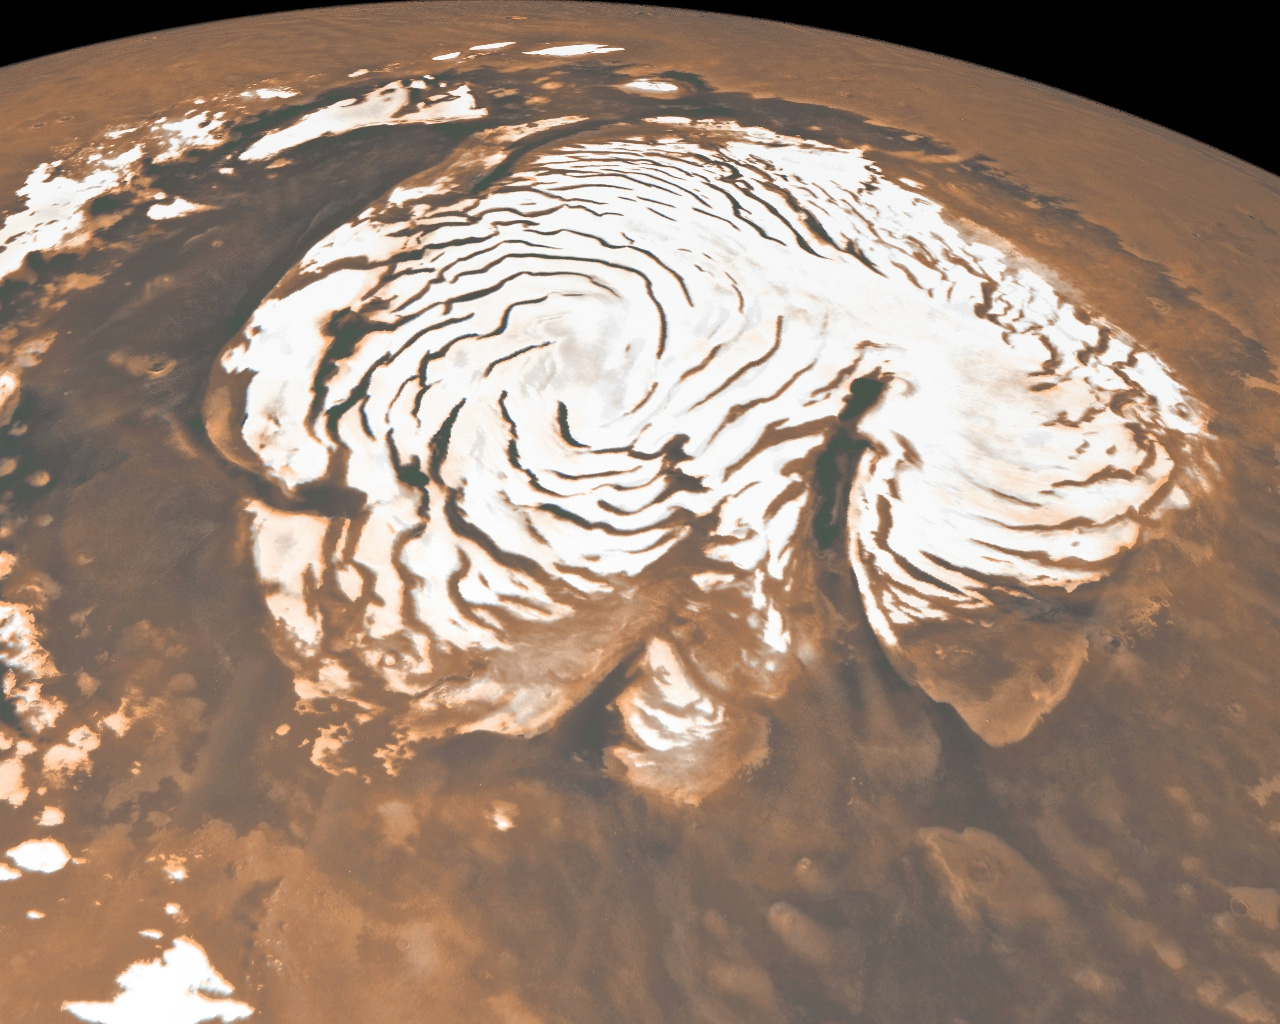 but a new discovery of water near the equator could affect future human missions to the Red Planet.